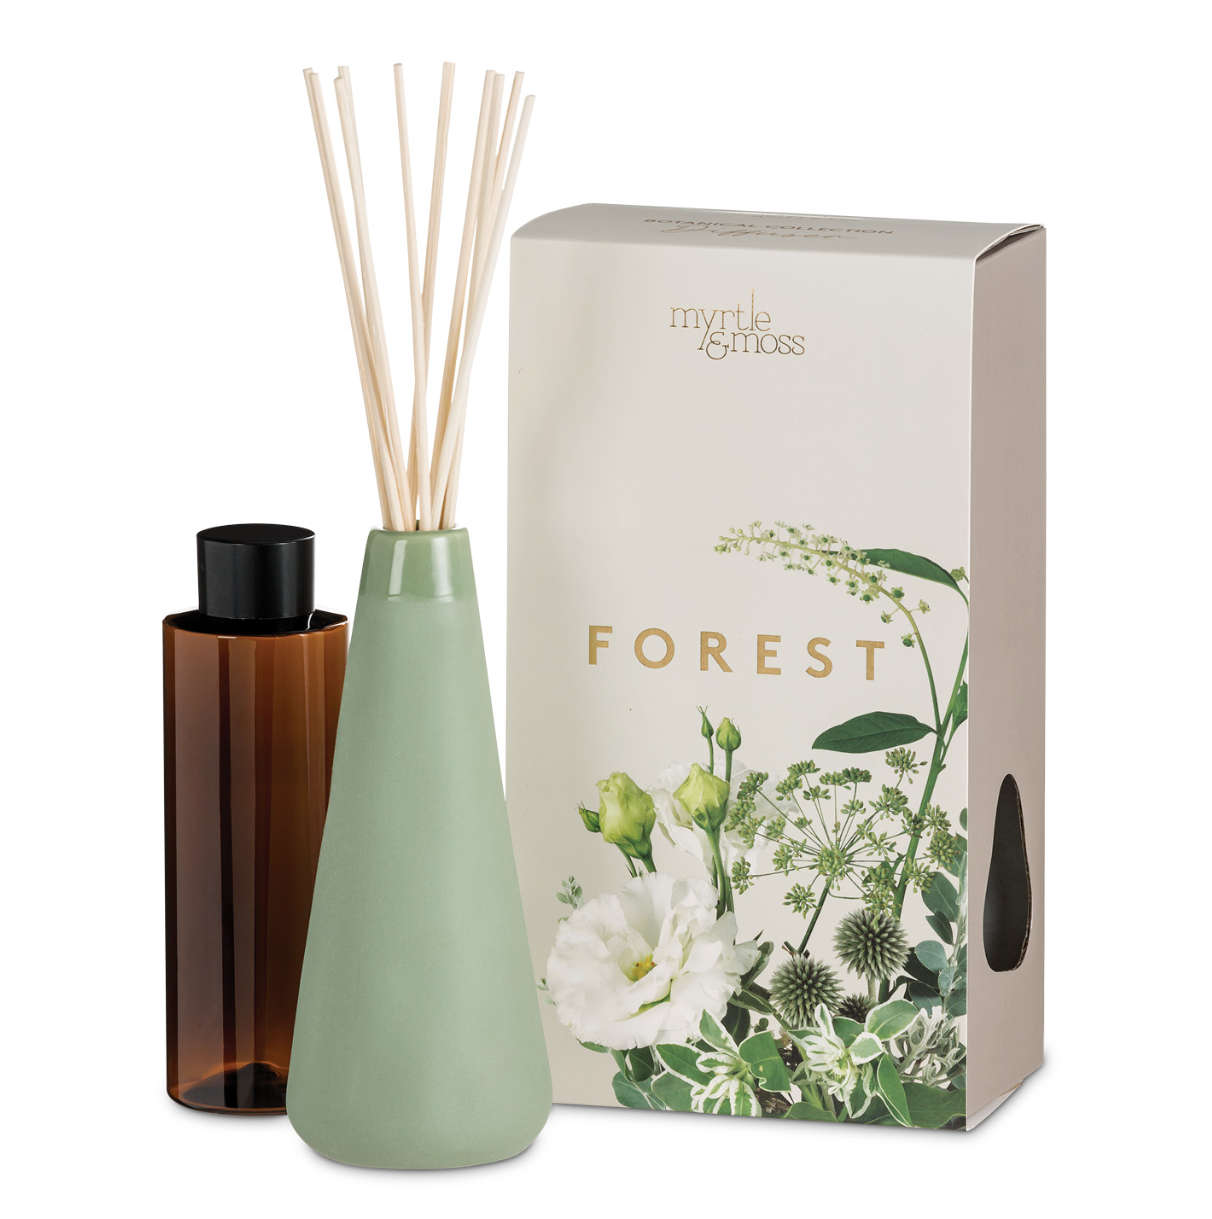 Myrtle and Moss Botanical Diffuser - Forest